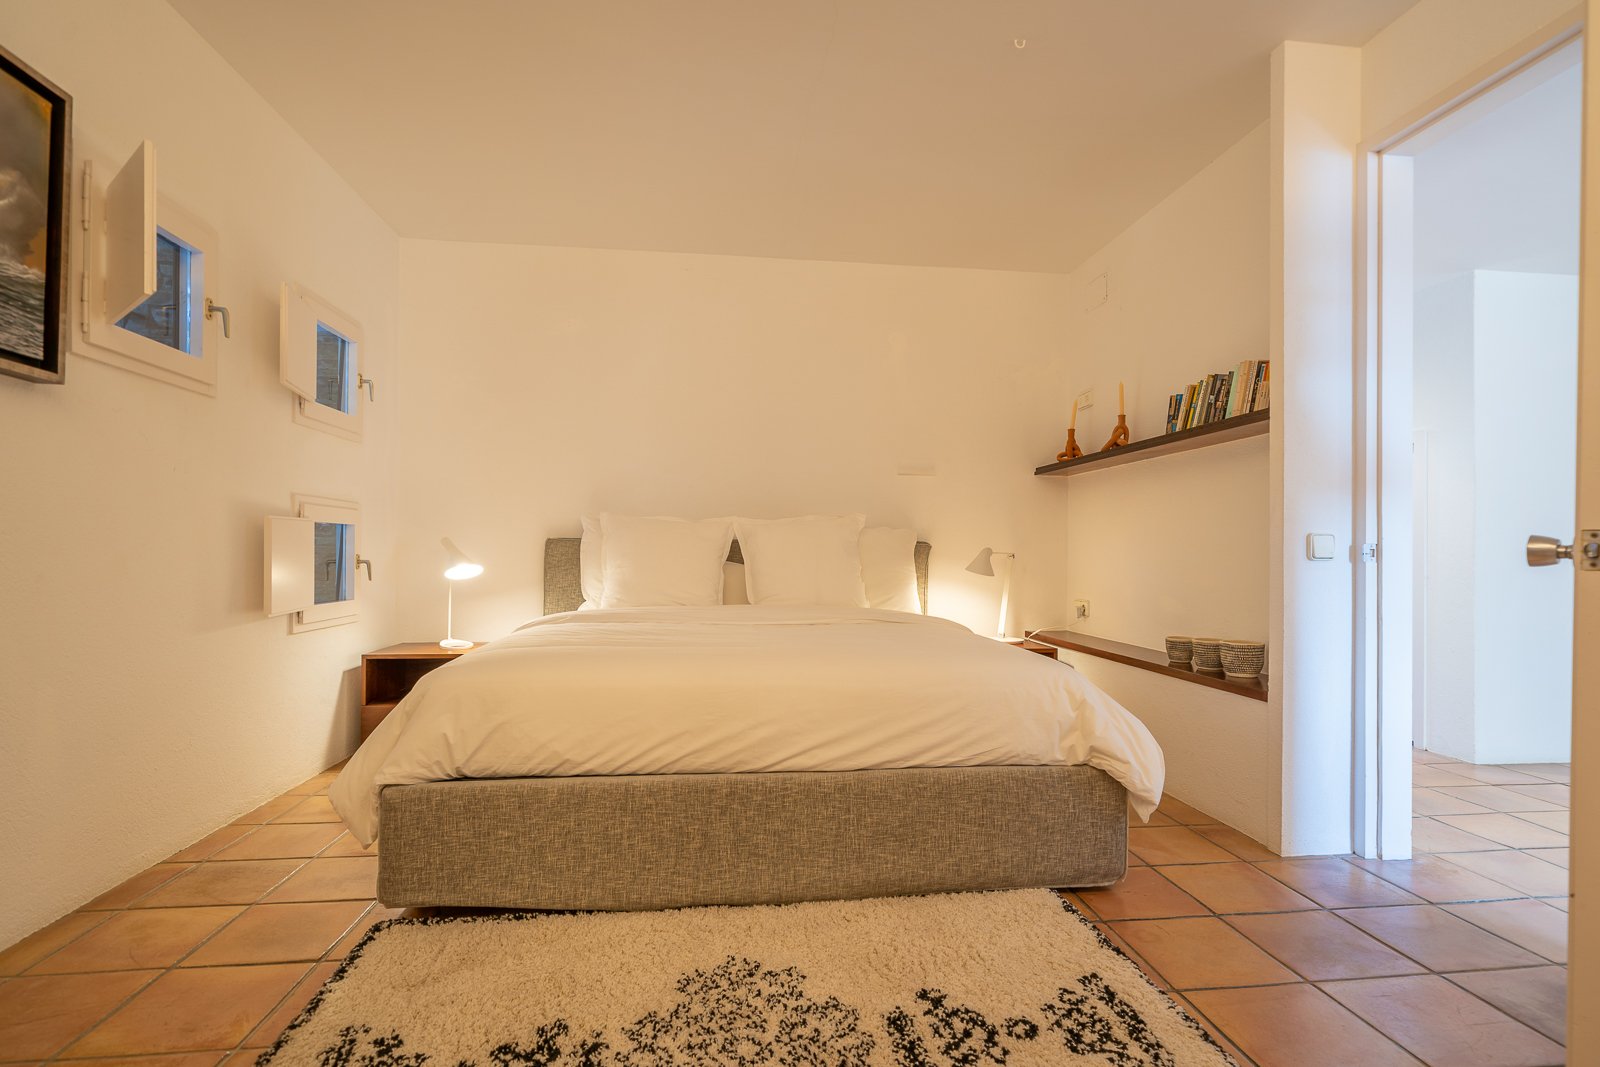 Exceptional house with bedroom in Cadaqués, Spain